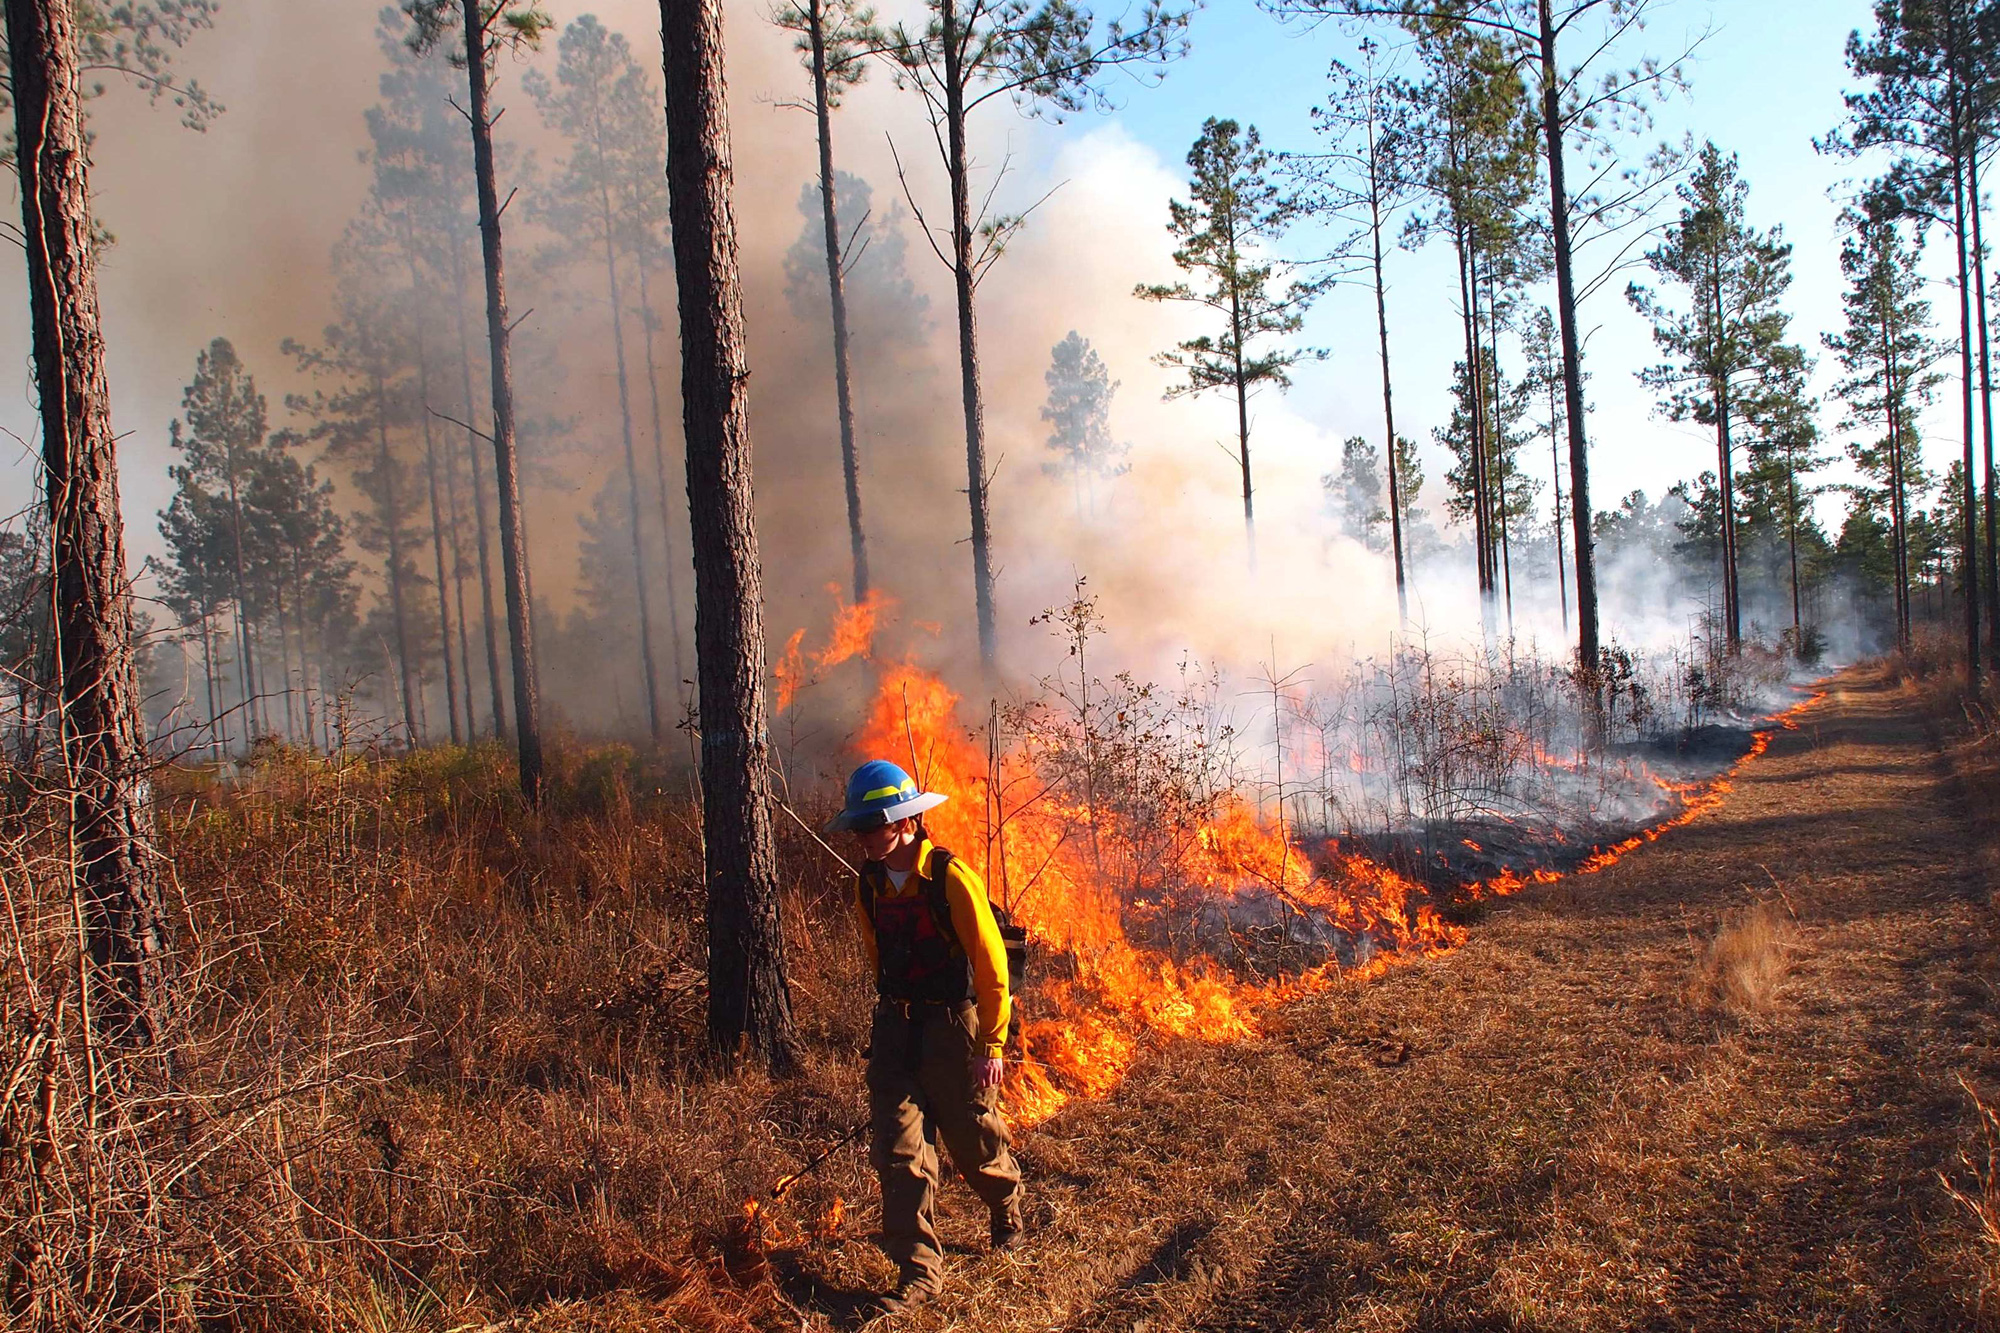 A fire technician from The Orianne Society, a nonprofit with a conservation center in Georgia, lays down a line of prescribed fire. Credit: Randy Tate/The Longleaf Alliance